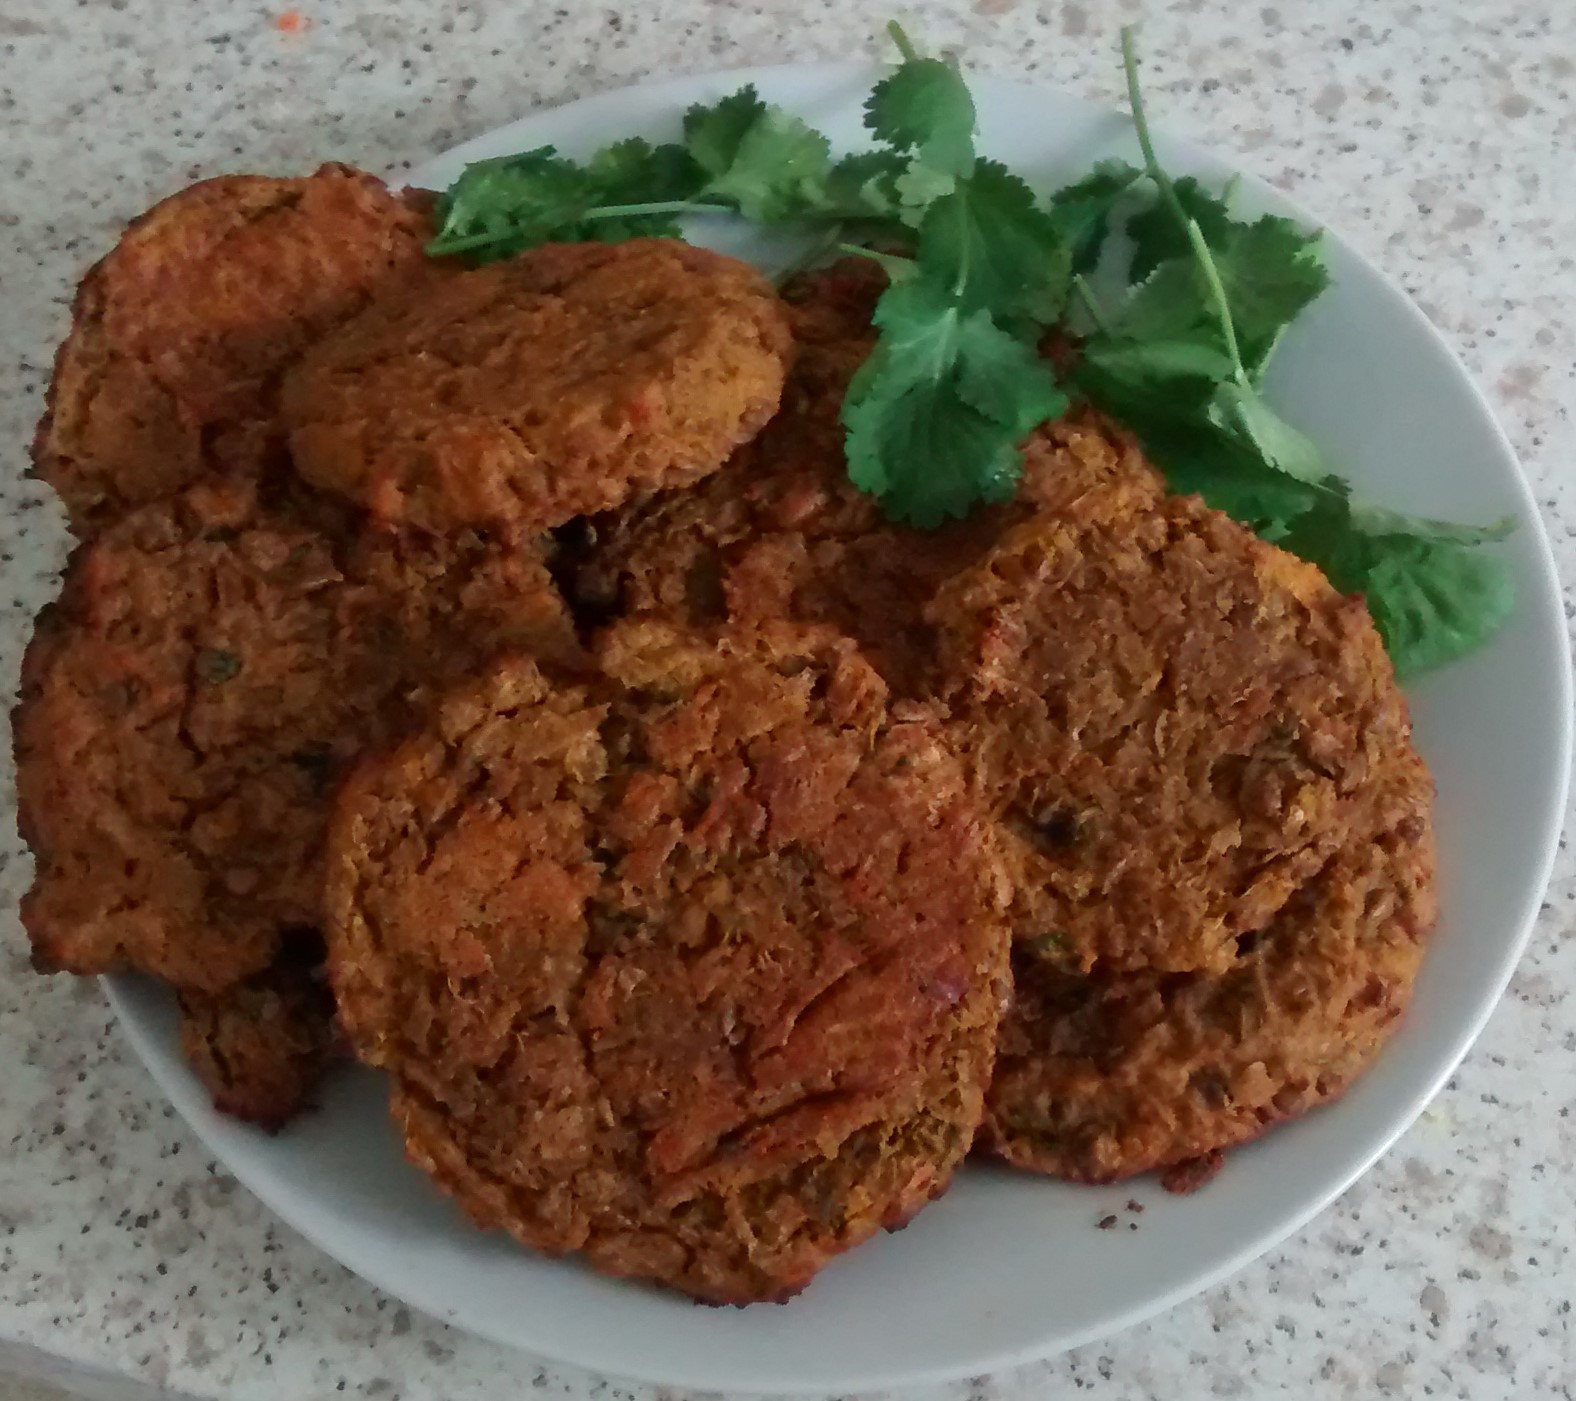 Spicy Sweet Potatoes and Lentils Burgers with Red Pepper Sauce